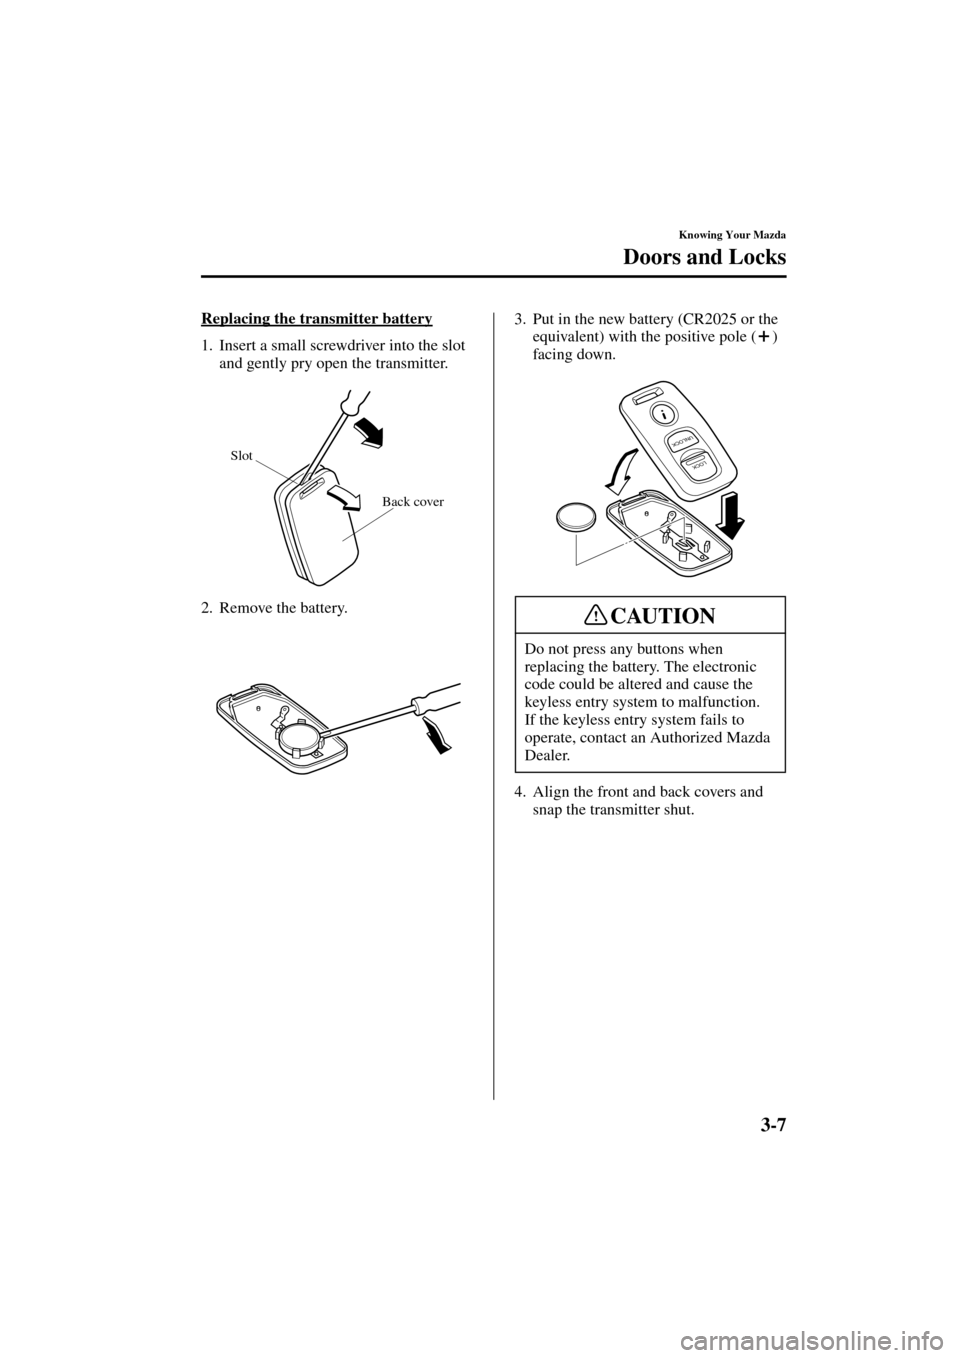 MAZDA MODEL MPV 2004  Owners Manual (in English) 3-7
Knowing Your Mazda
Doors and Locks
Form No. 8S06-EA-03H
Replacing the transmitter battery
1. Insert a small screwdriver into the slot 
and gently pry open the transmitter.
2. Remove the battery.3.